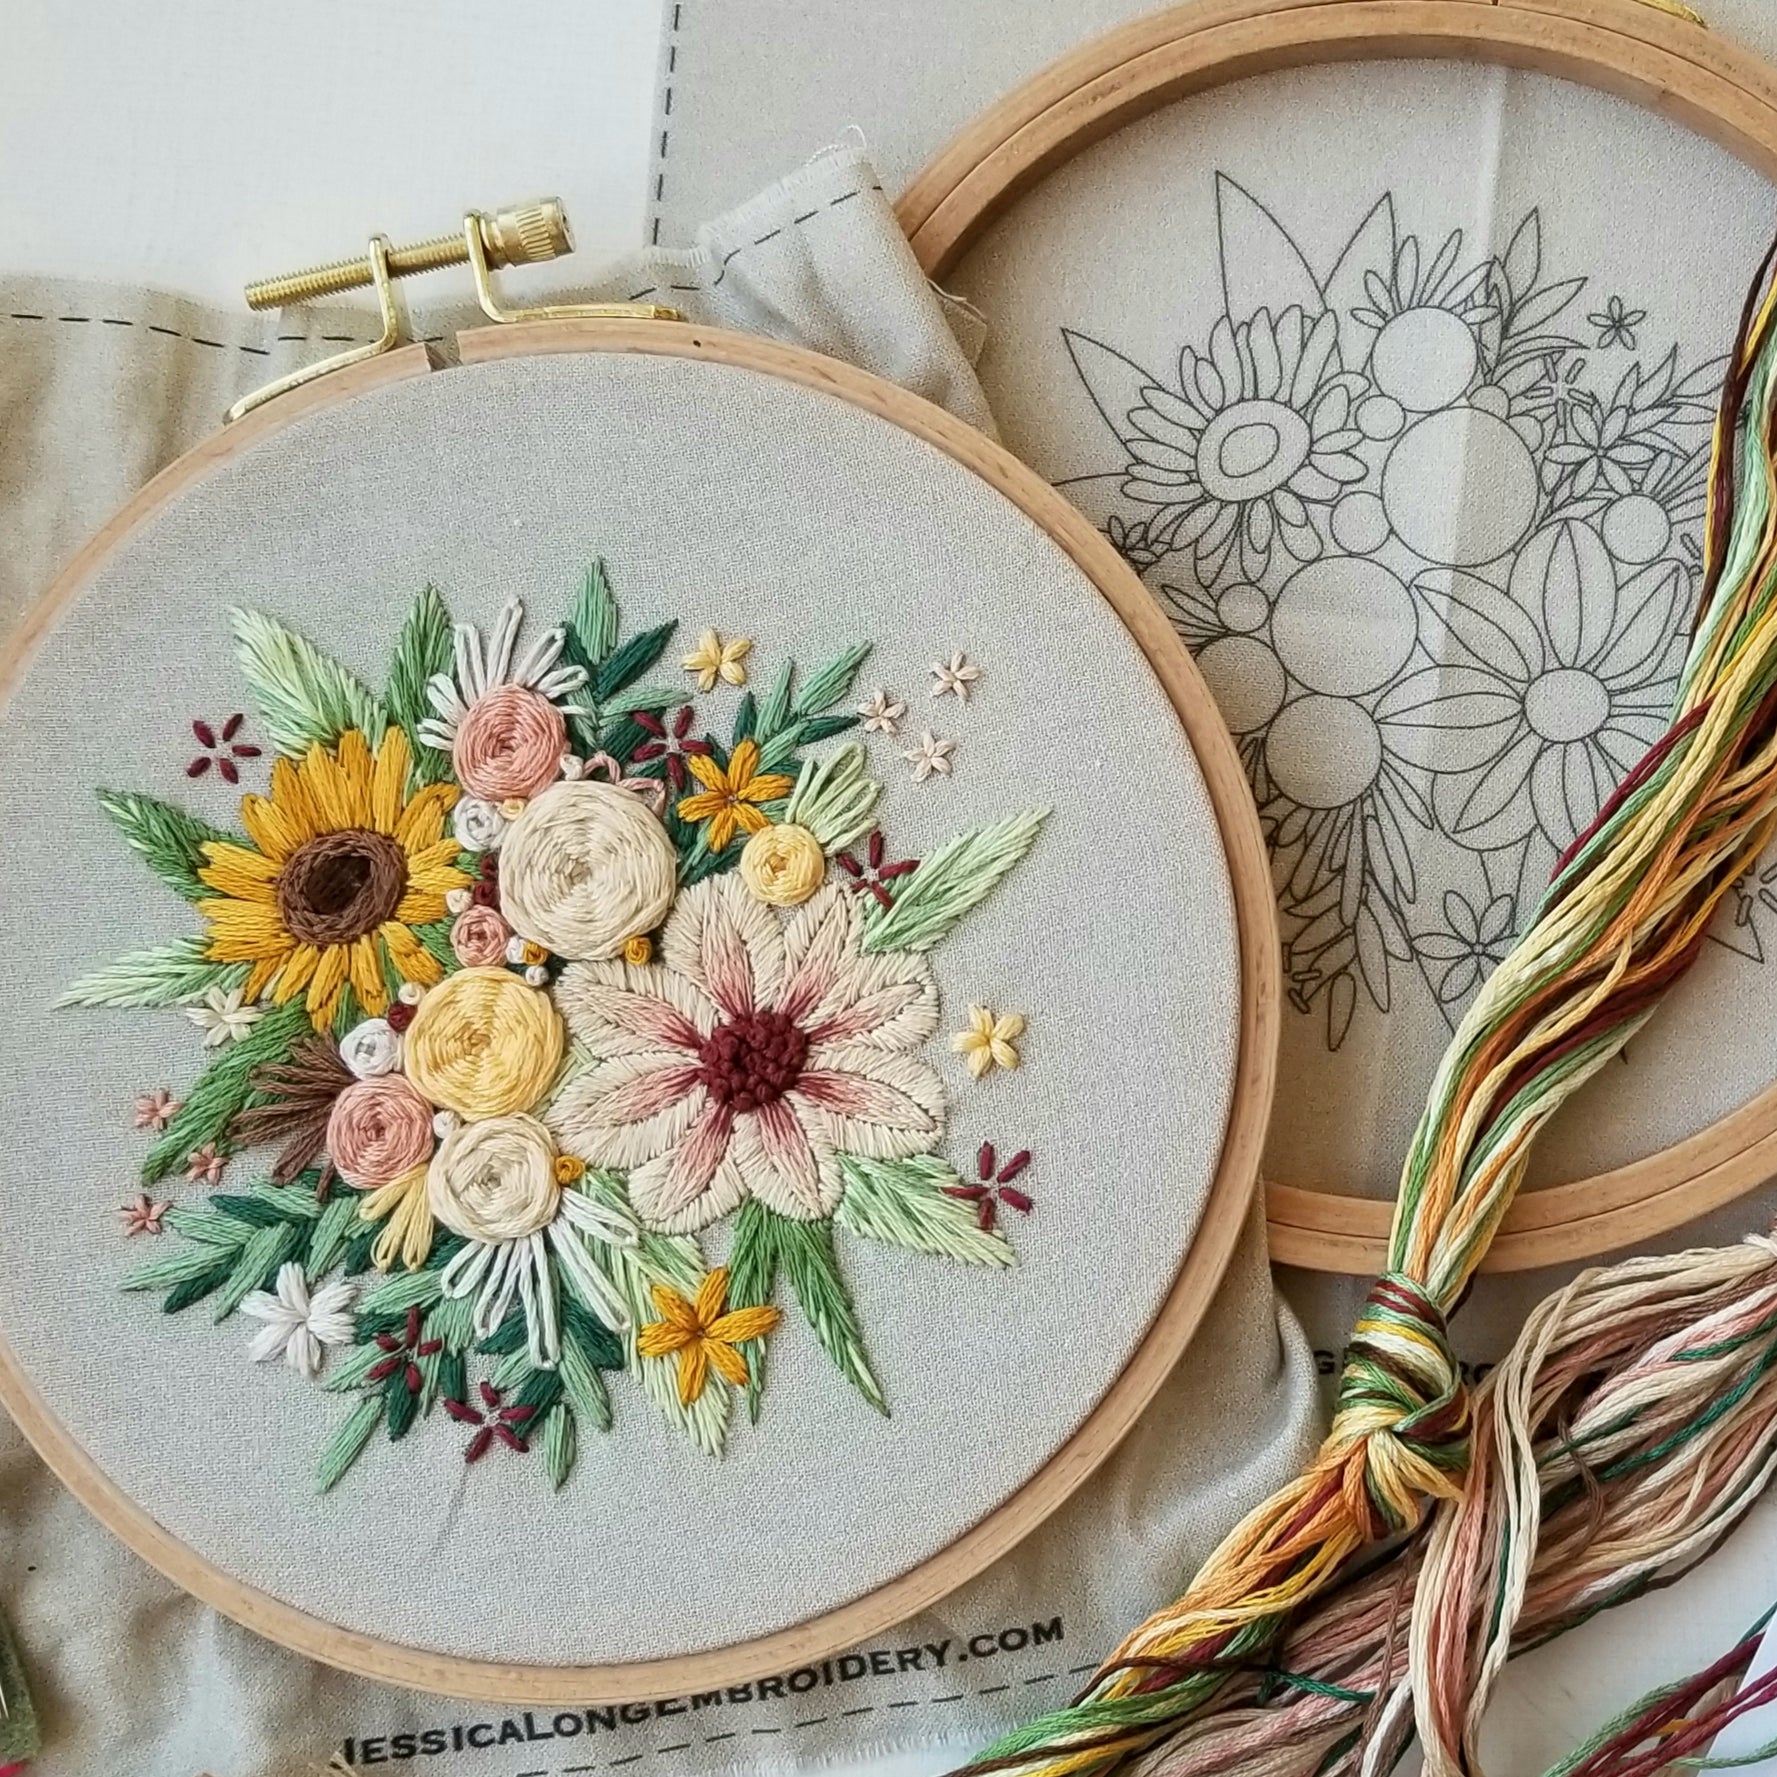  VELLBONG Embroidery Kit with Floral Pattern 4 Sets